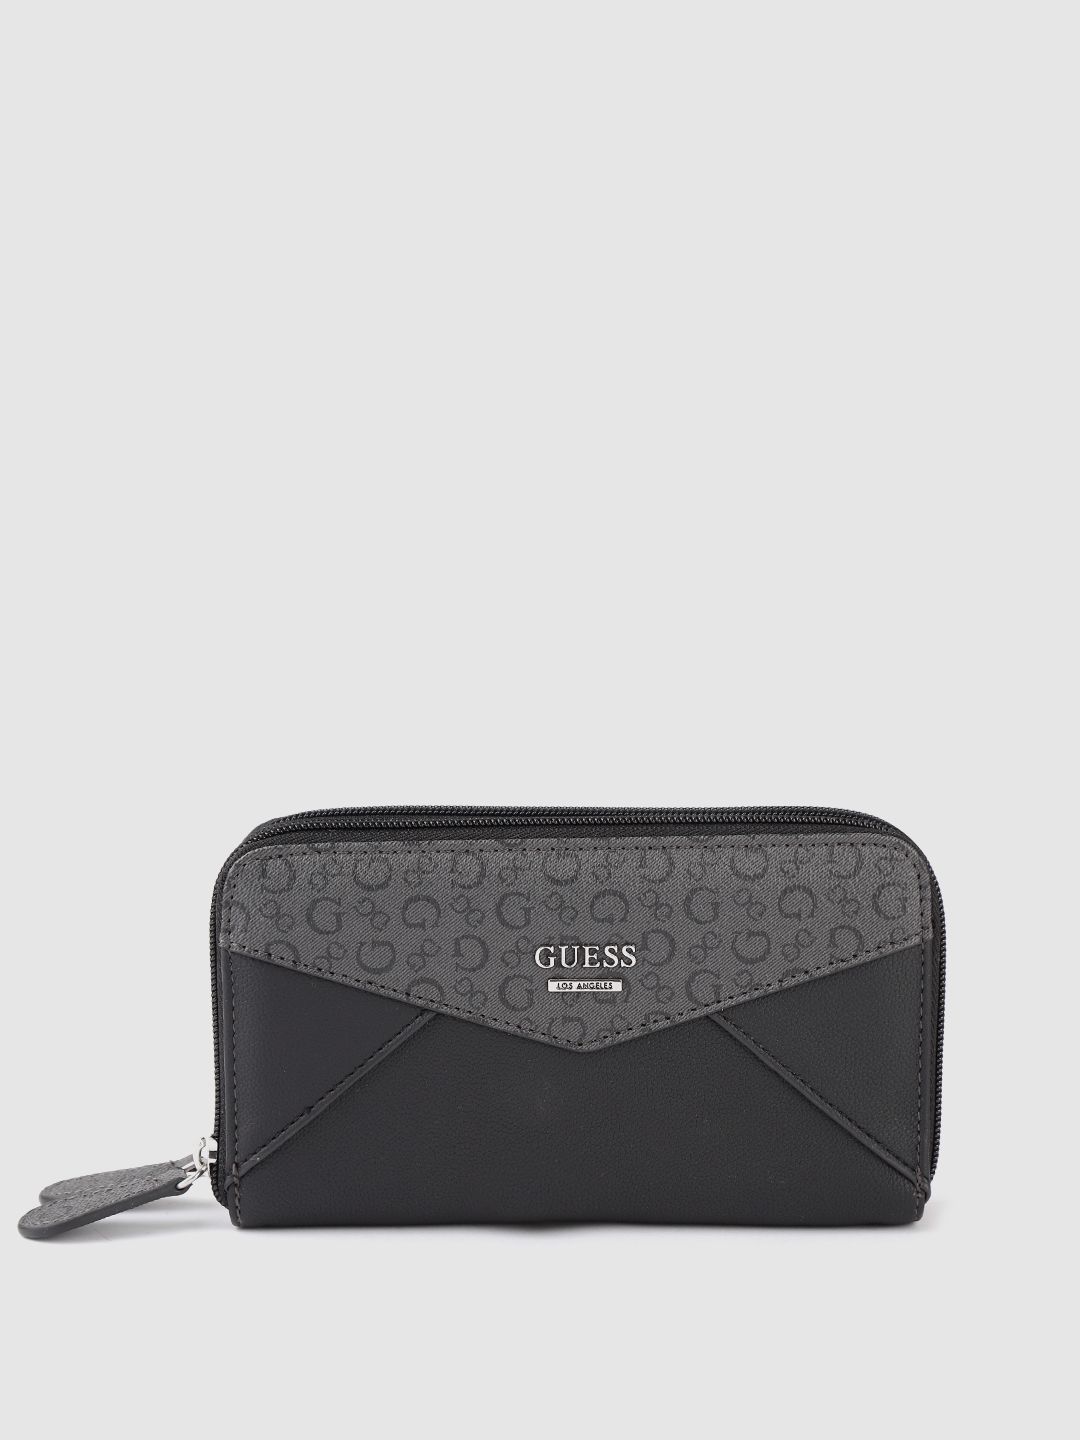 GUESS Women Black & Charcoal Typography Printed Zip Around Wallet Price in India